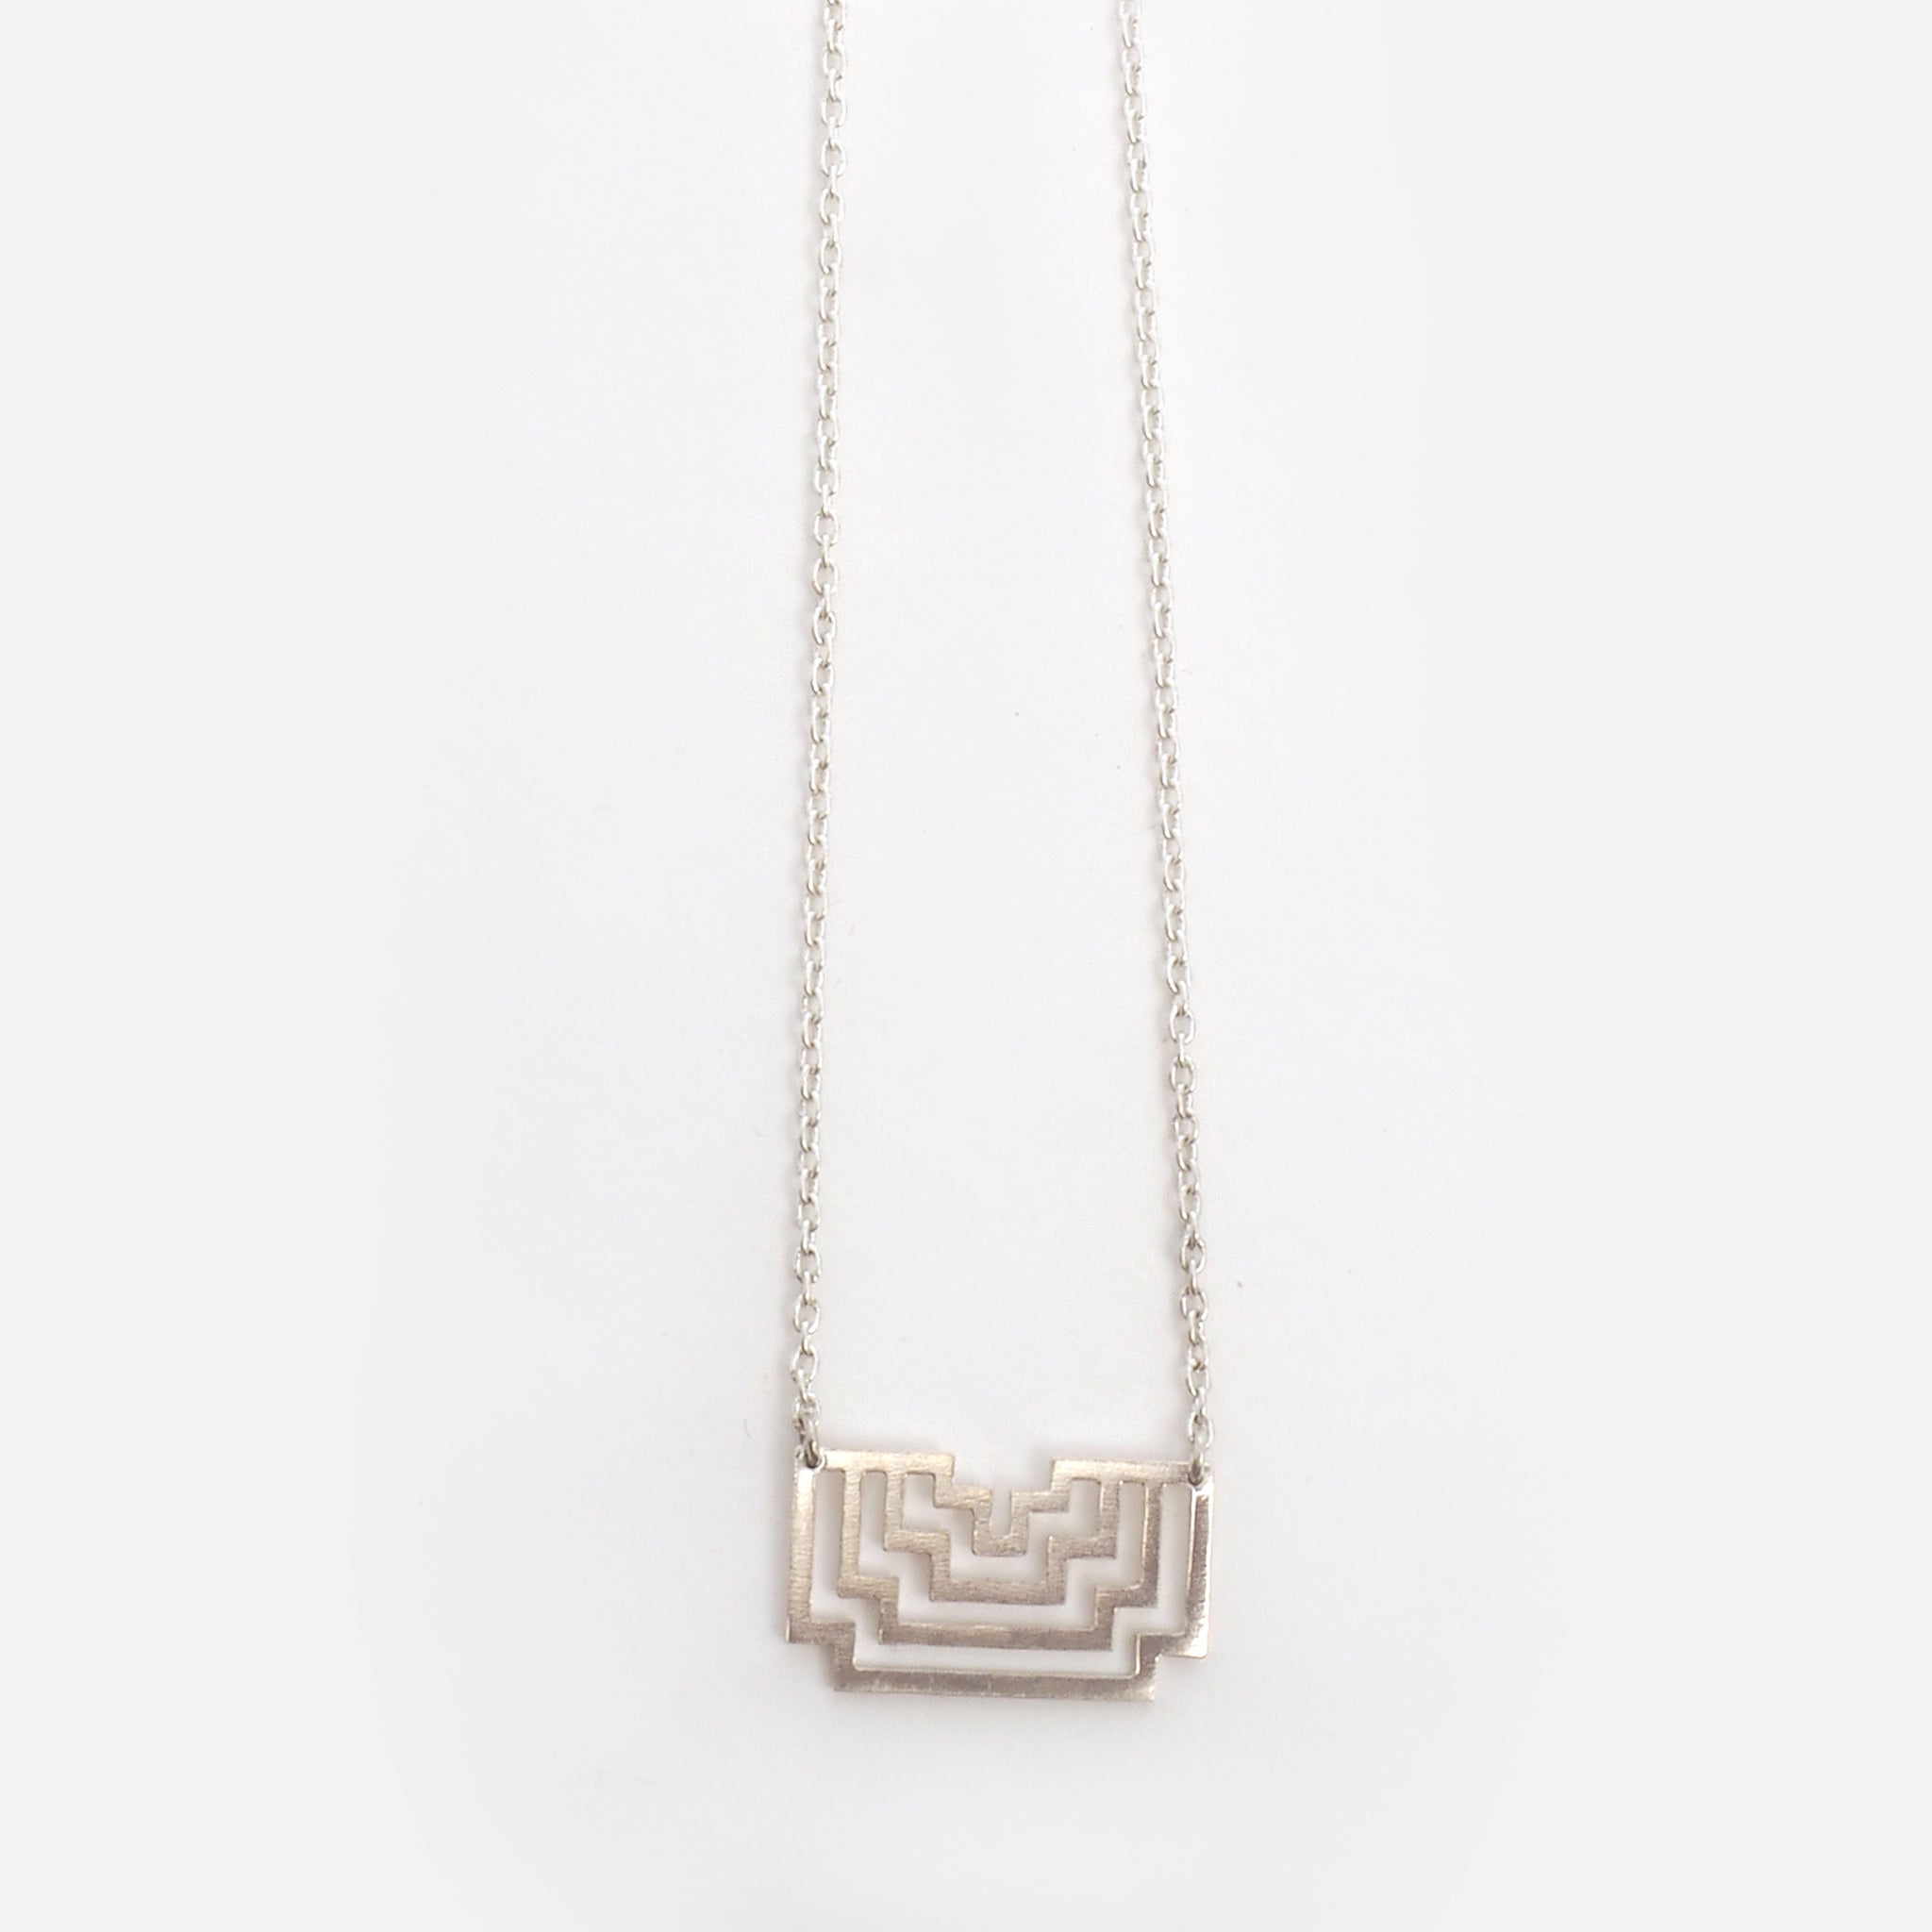 Homage To Peti – Small Silver Necklace